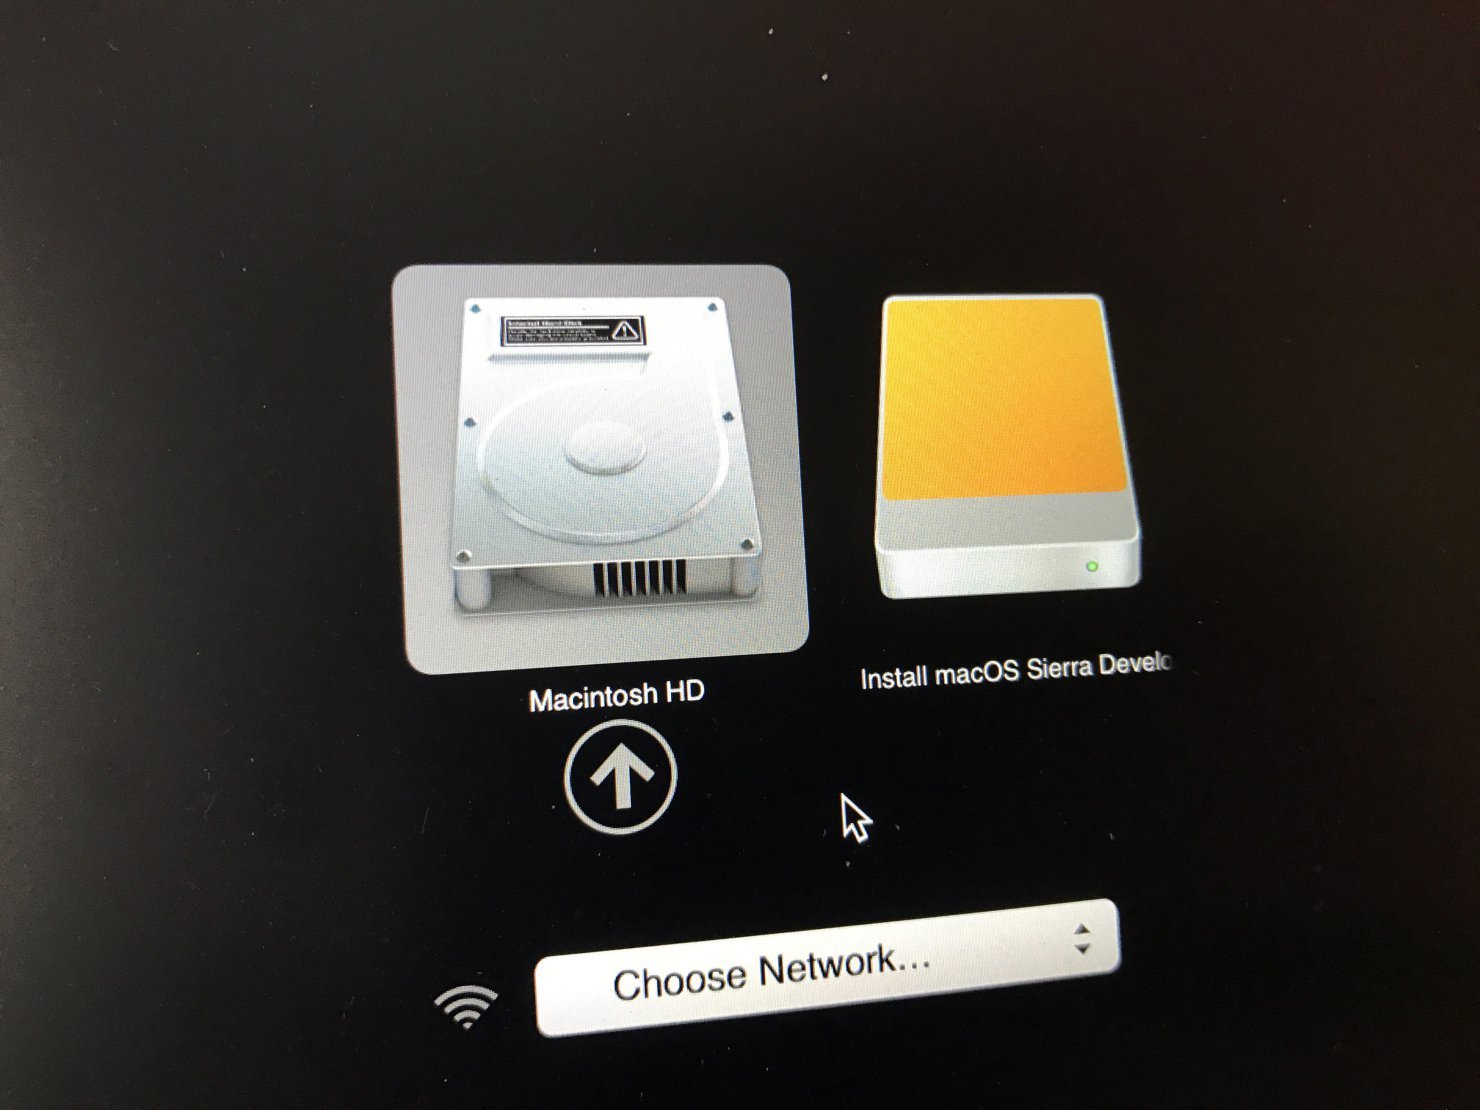 macos clean install mojave